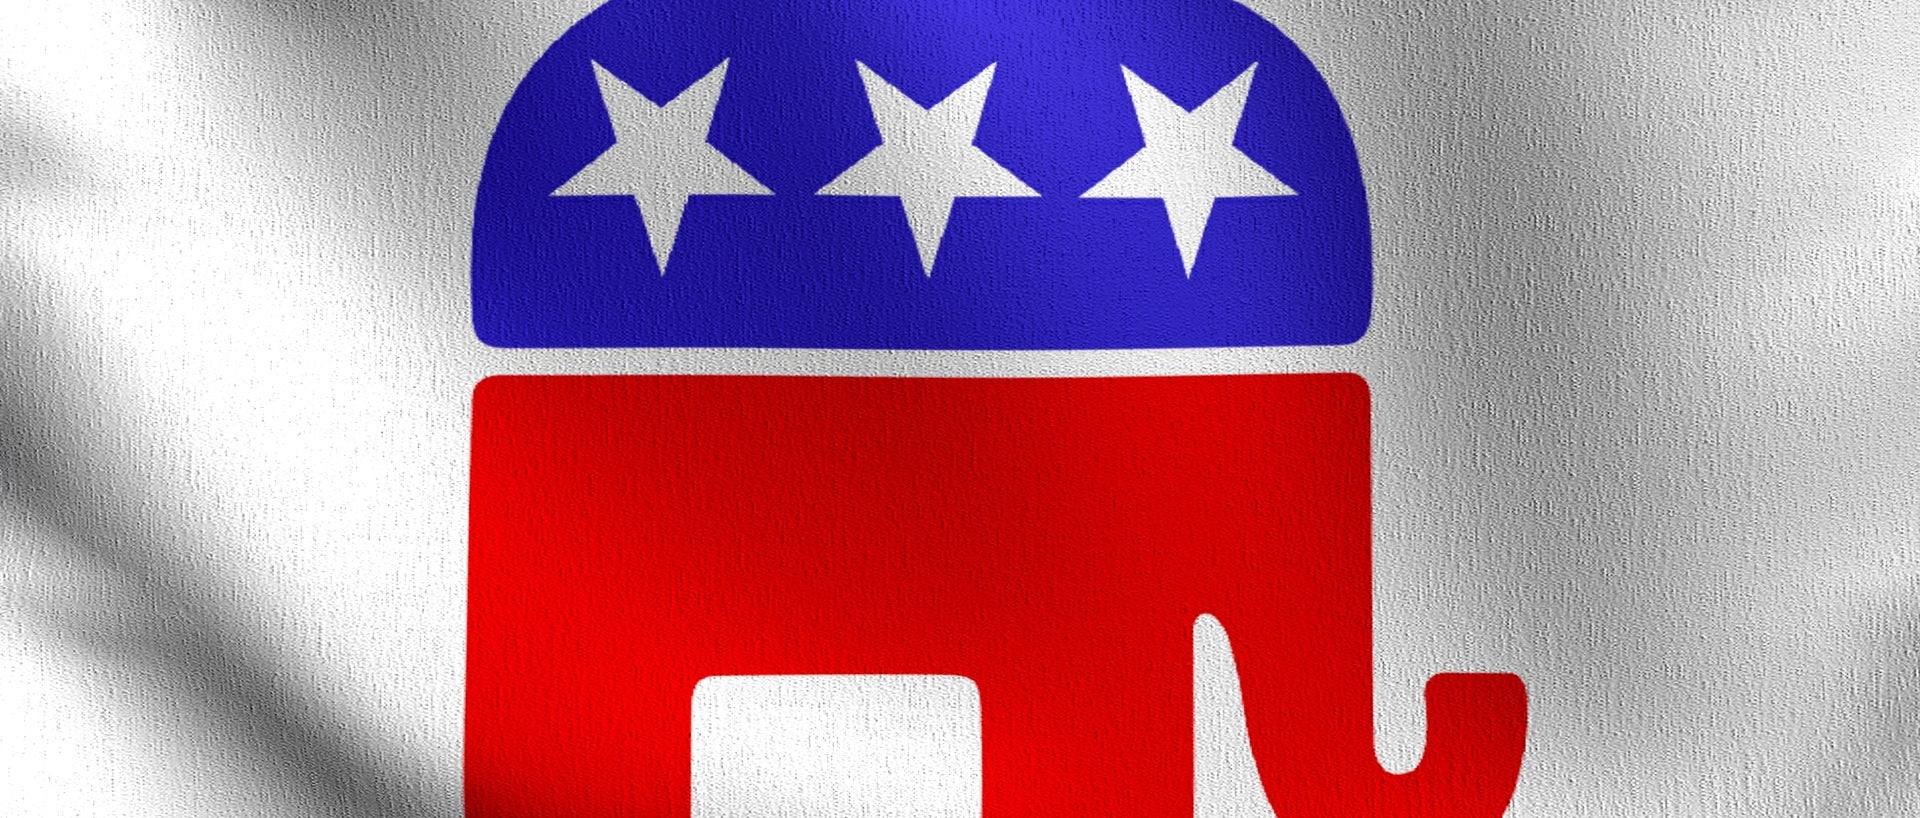 A stock image of the Republican National Committee's elephant logo.